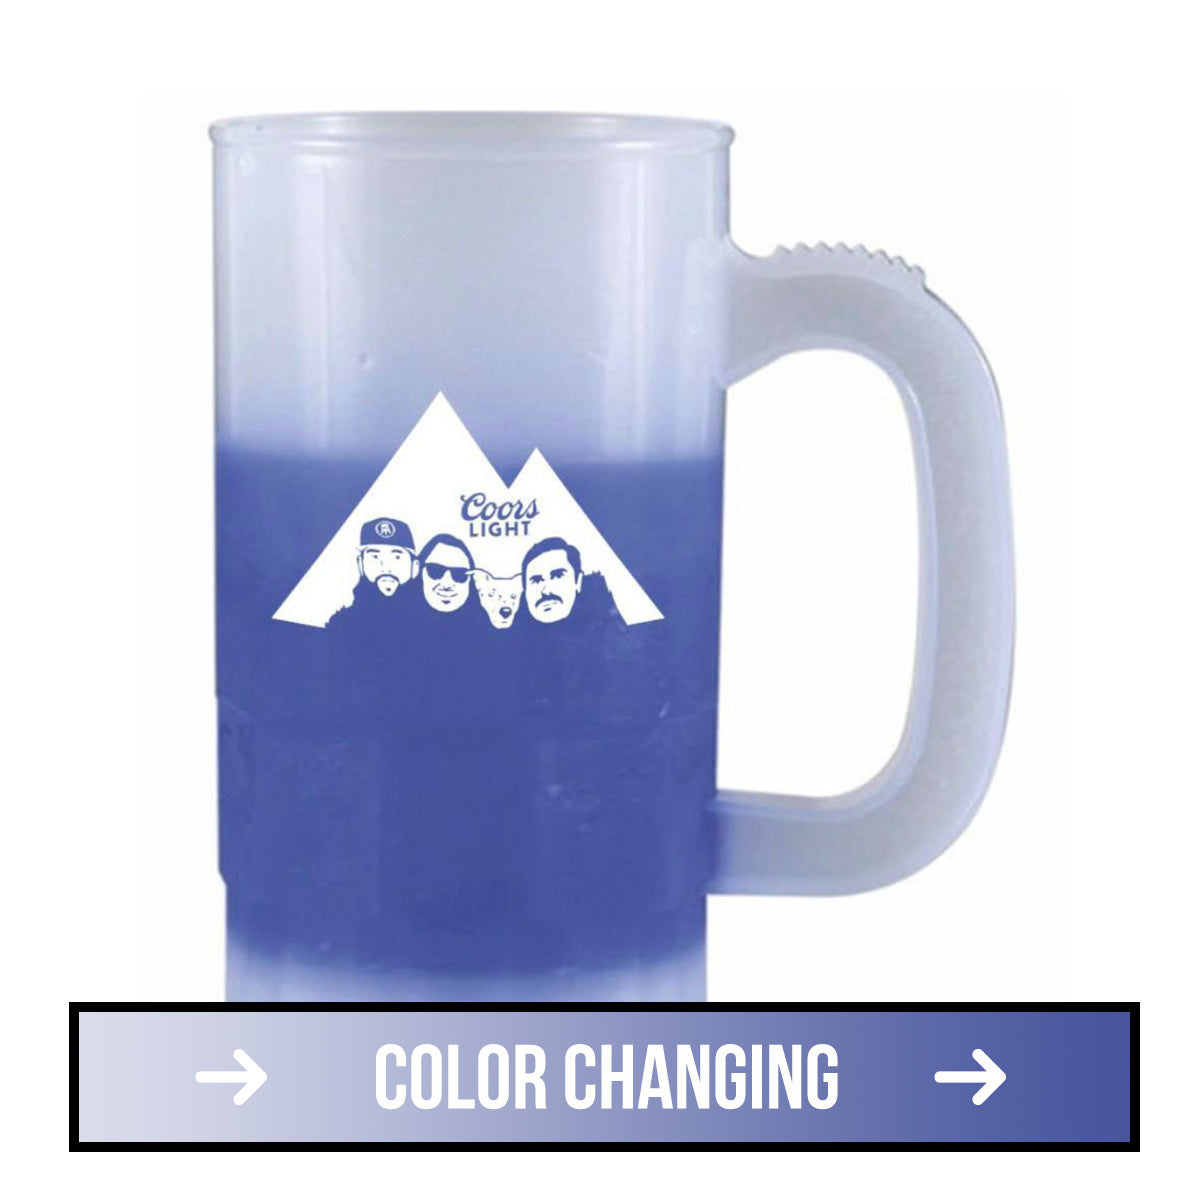 Coors x Pardon My Take Color Changing Beer Stein-Drinkware-Pardon My Take-One Size-Blue-Barstool Sports